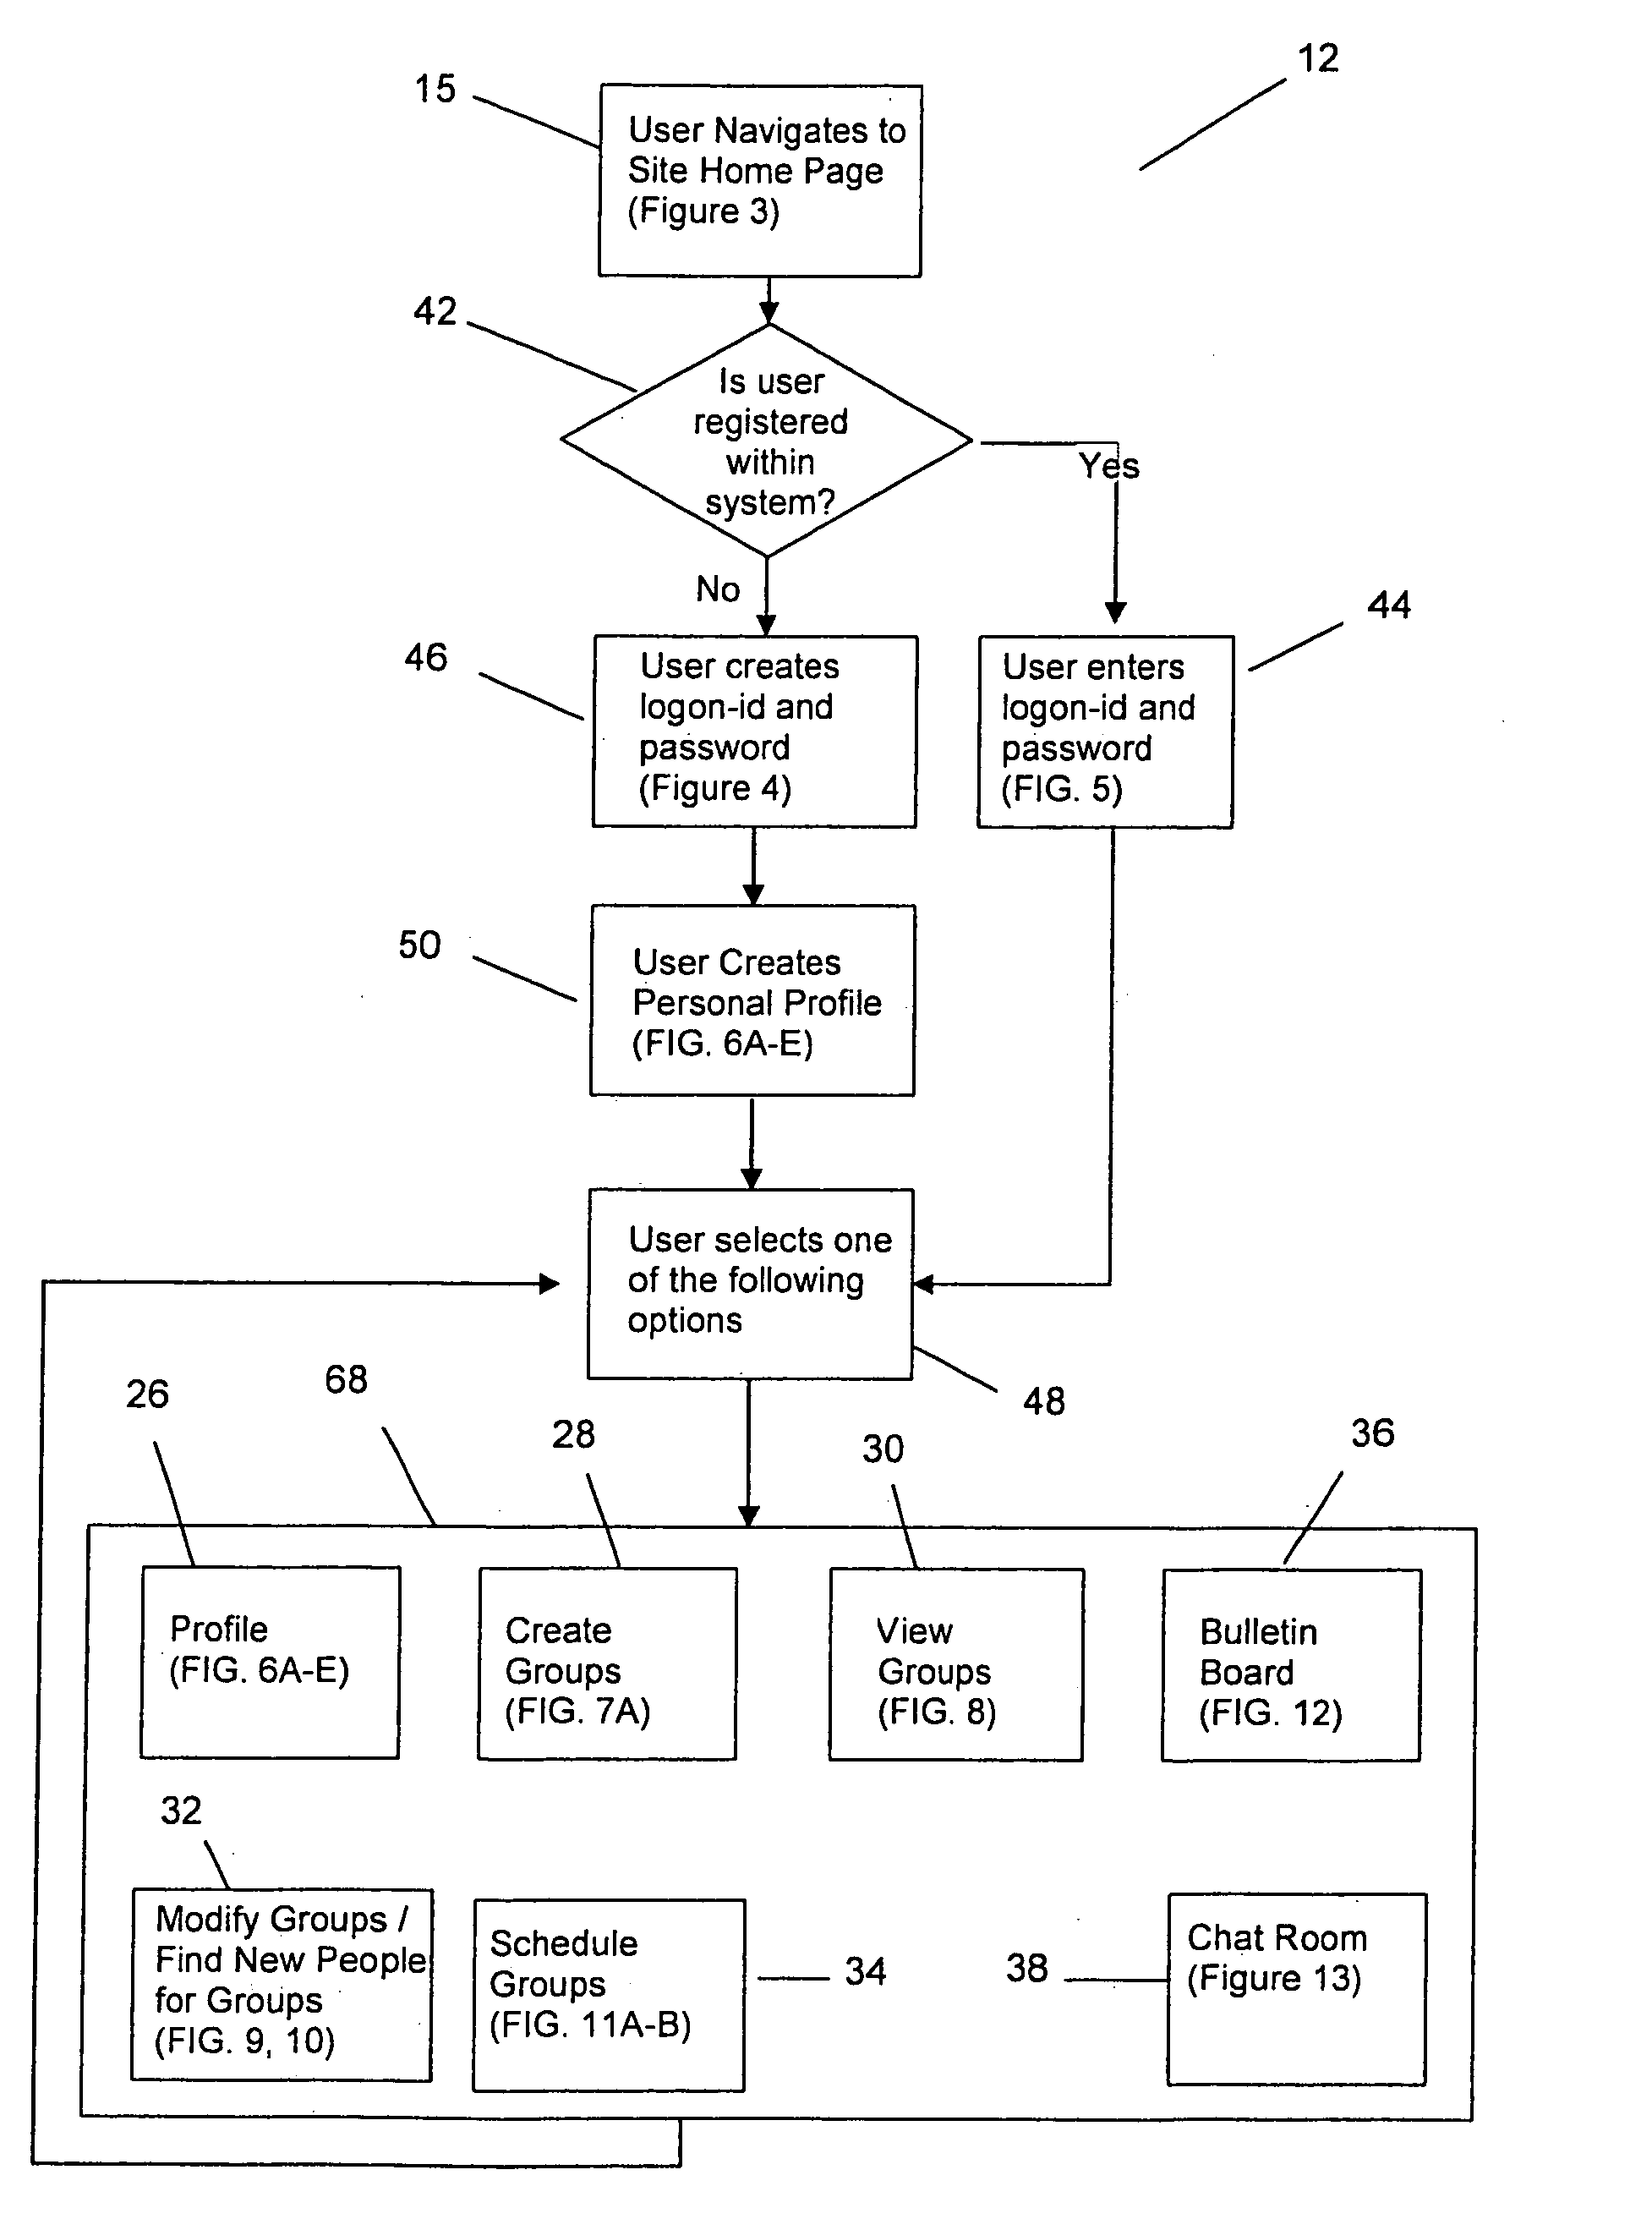 Method for grouping computer subscribers by common preferences to establish non-intimate relationships